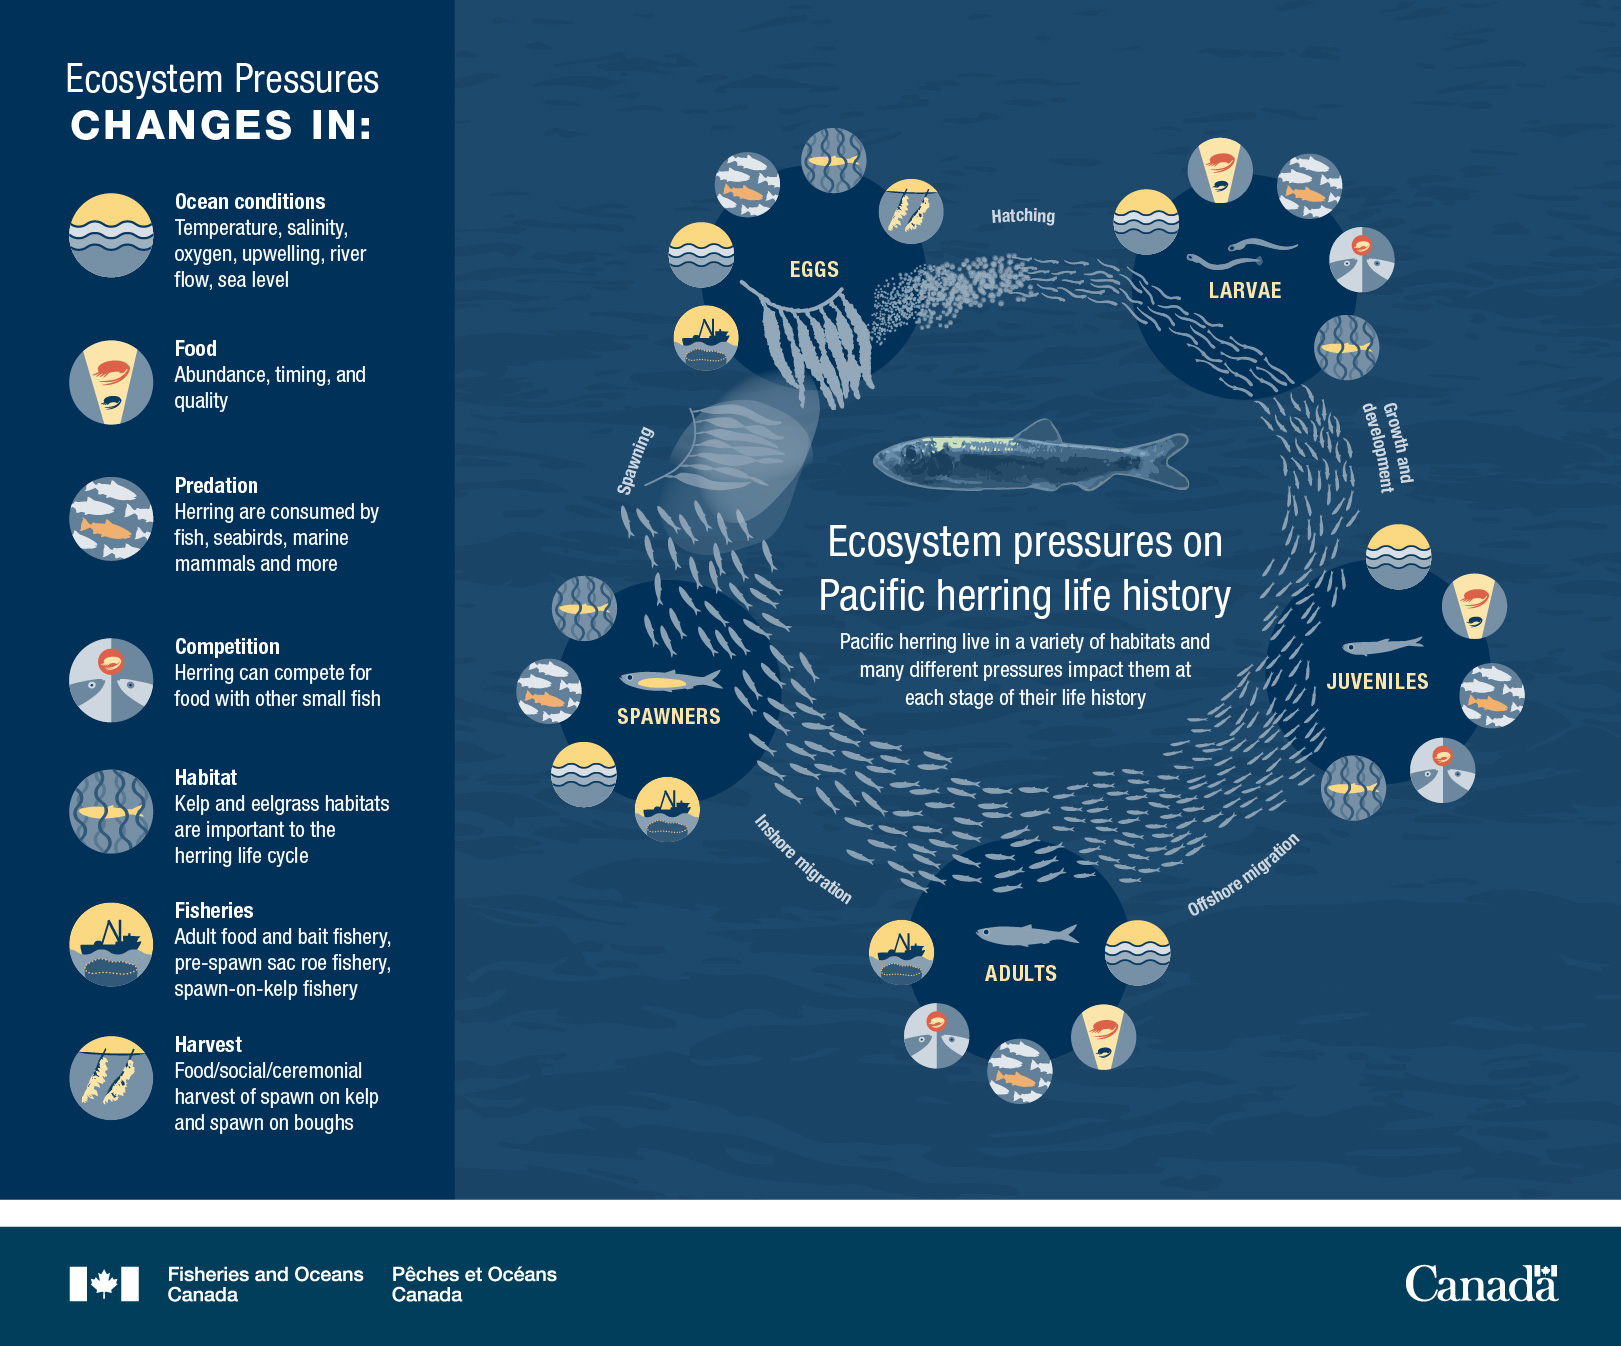 Canada’s Oceans Now, Pacific Ecosystems 2021 - Ecosystem pressures on Pacific herring life history